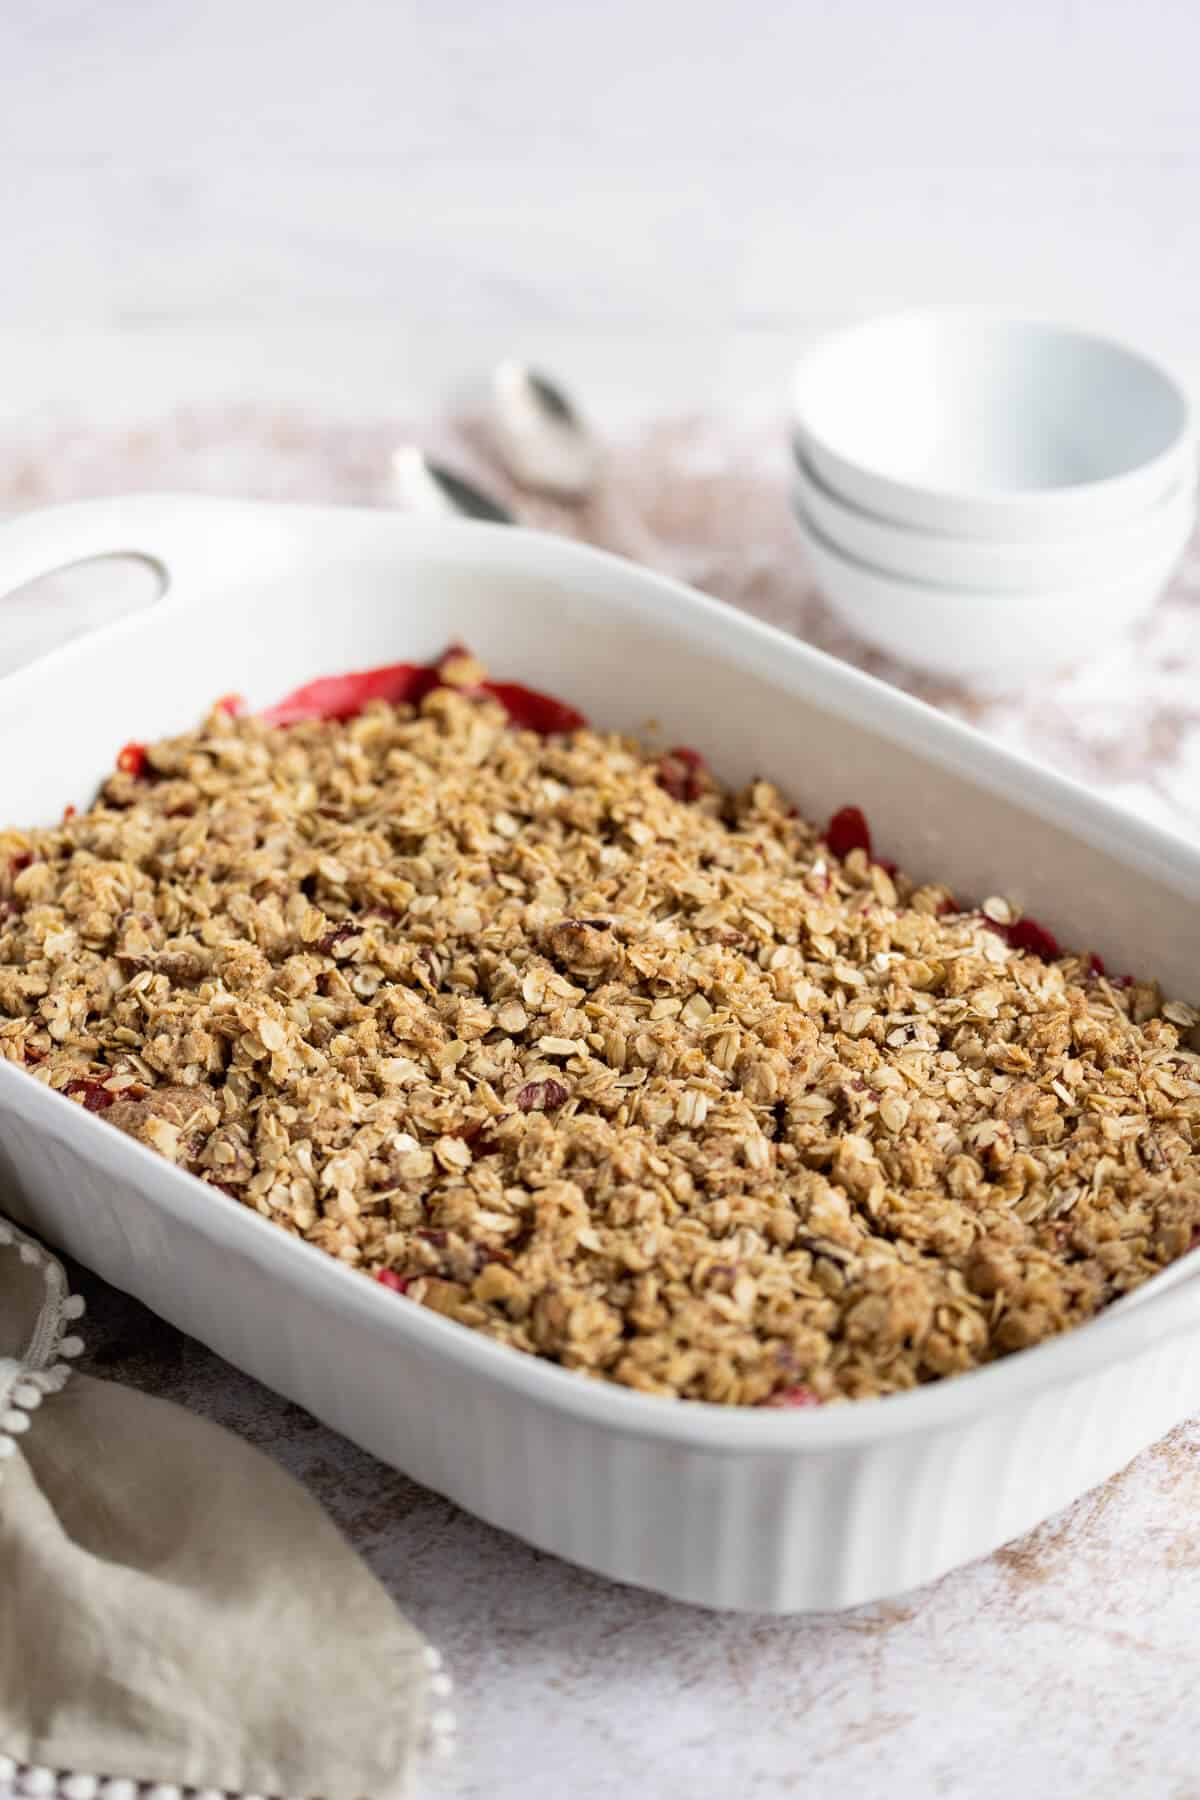 Rhubarb Crisp with Strawberries in a white casserole dish, just baked. Bowls and spoons are alongside it.